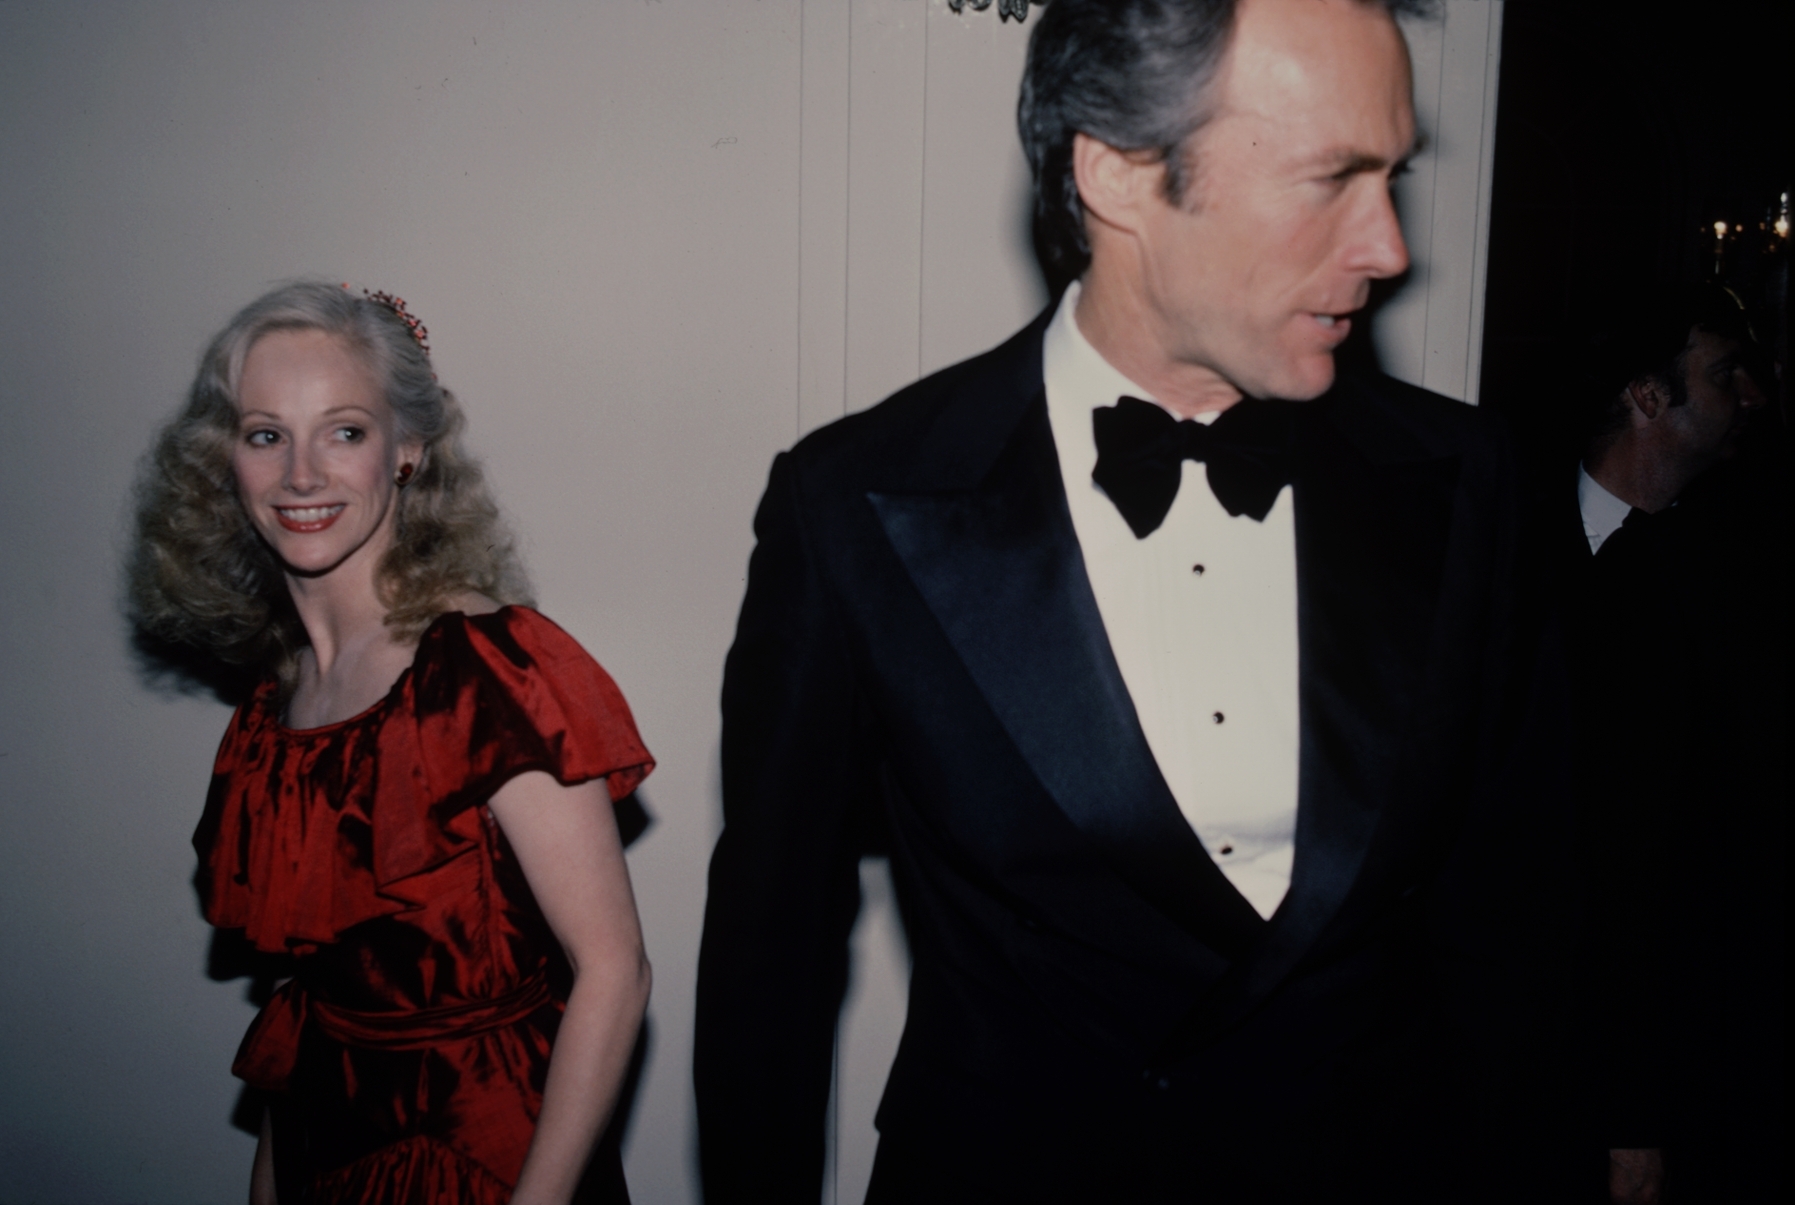 Clint Eastwood and Sondra Locke 1978. Forrás: The LIFE Picture Collection via Getty Images